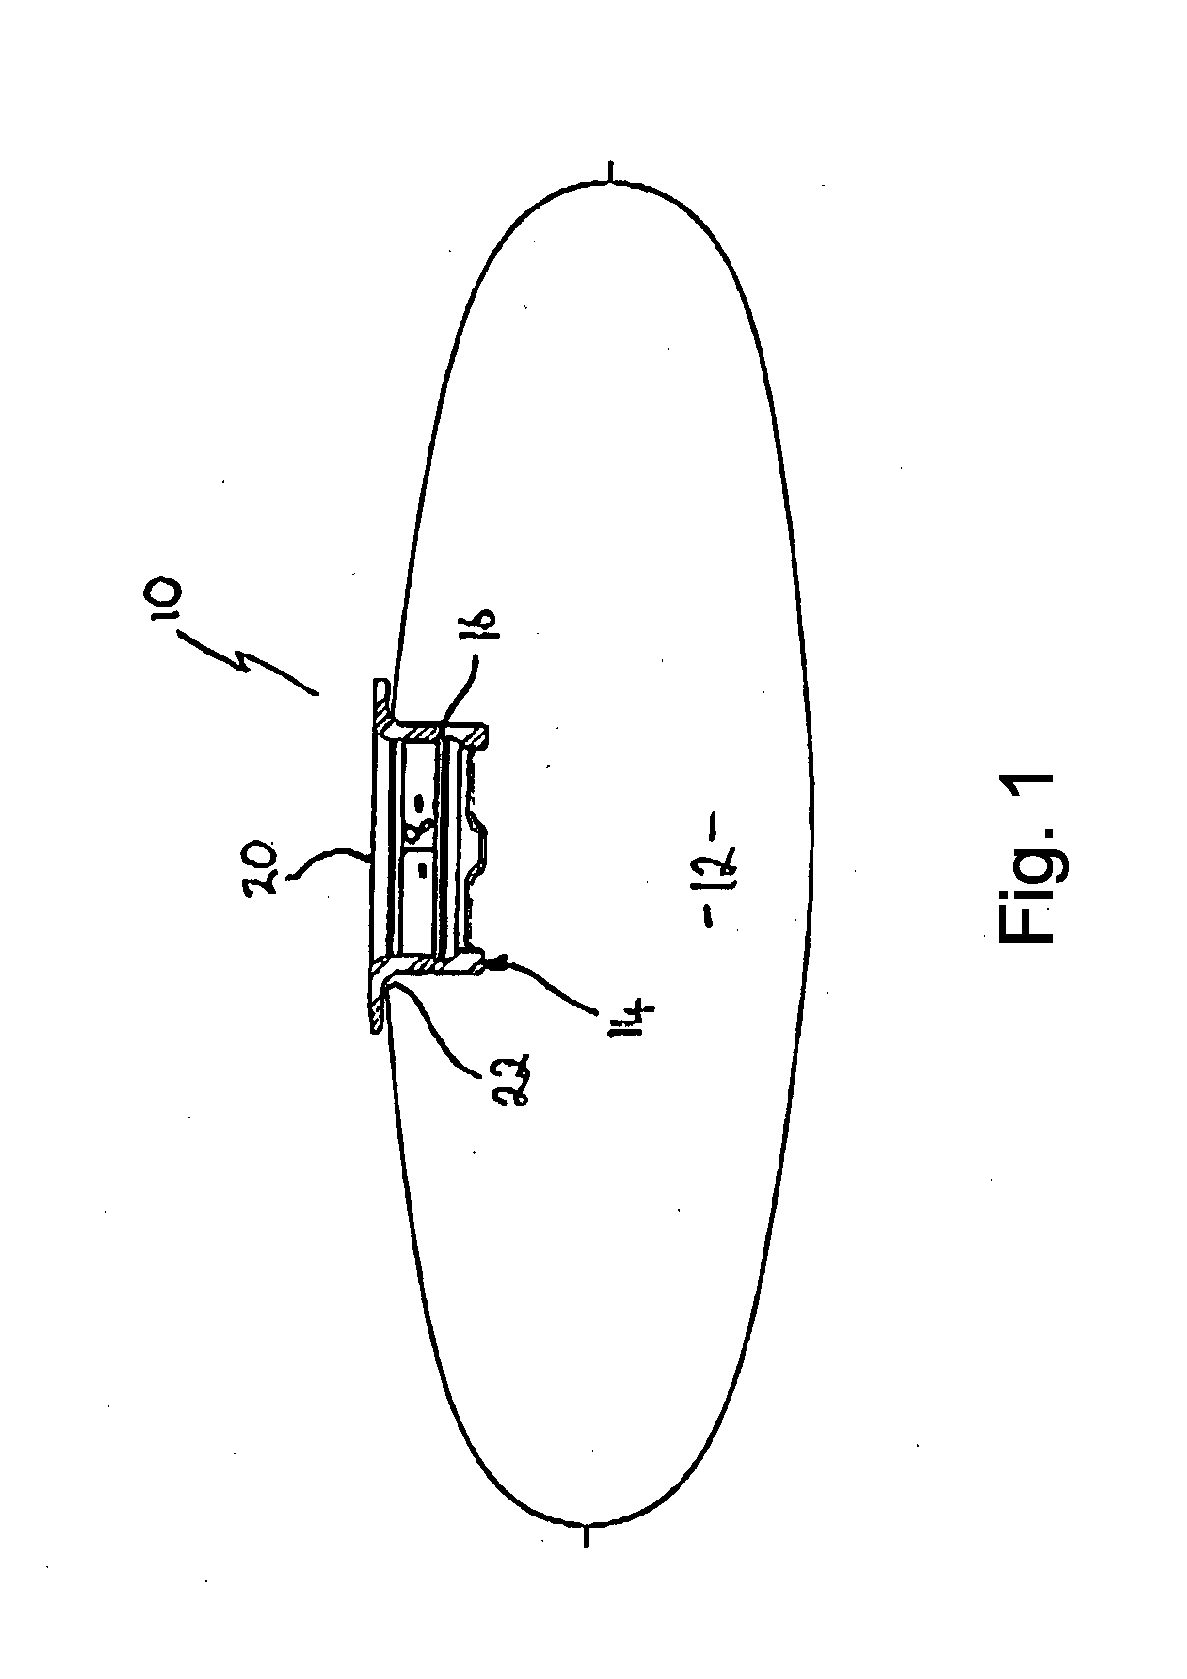 Valve for inflatable devices